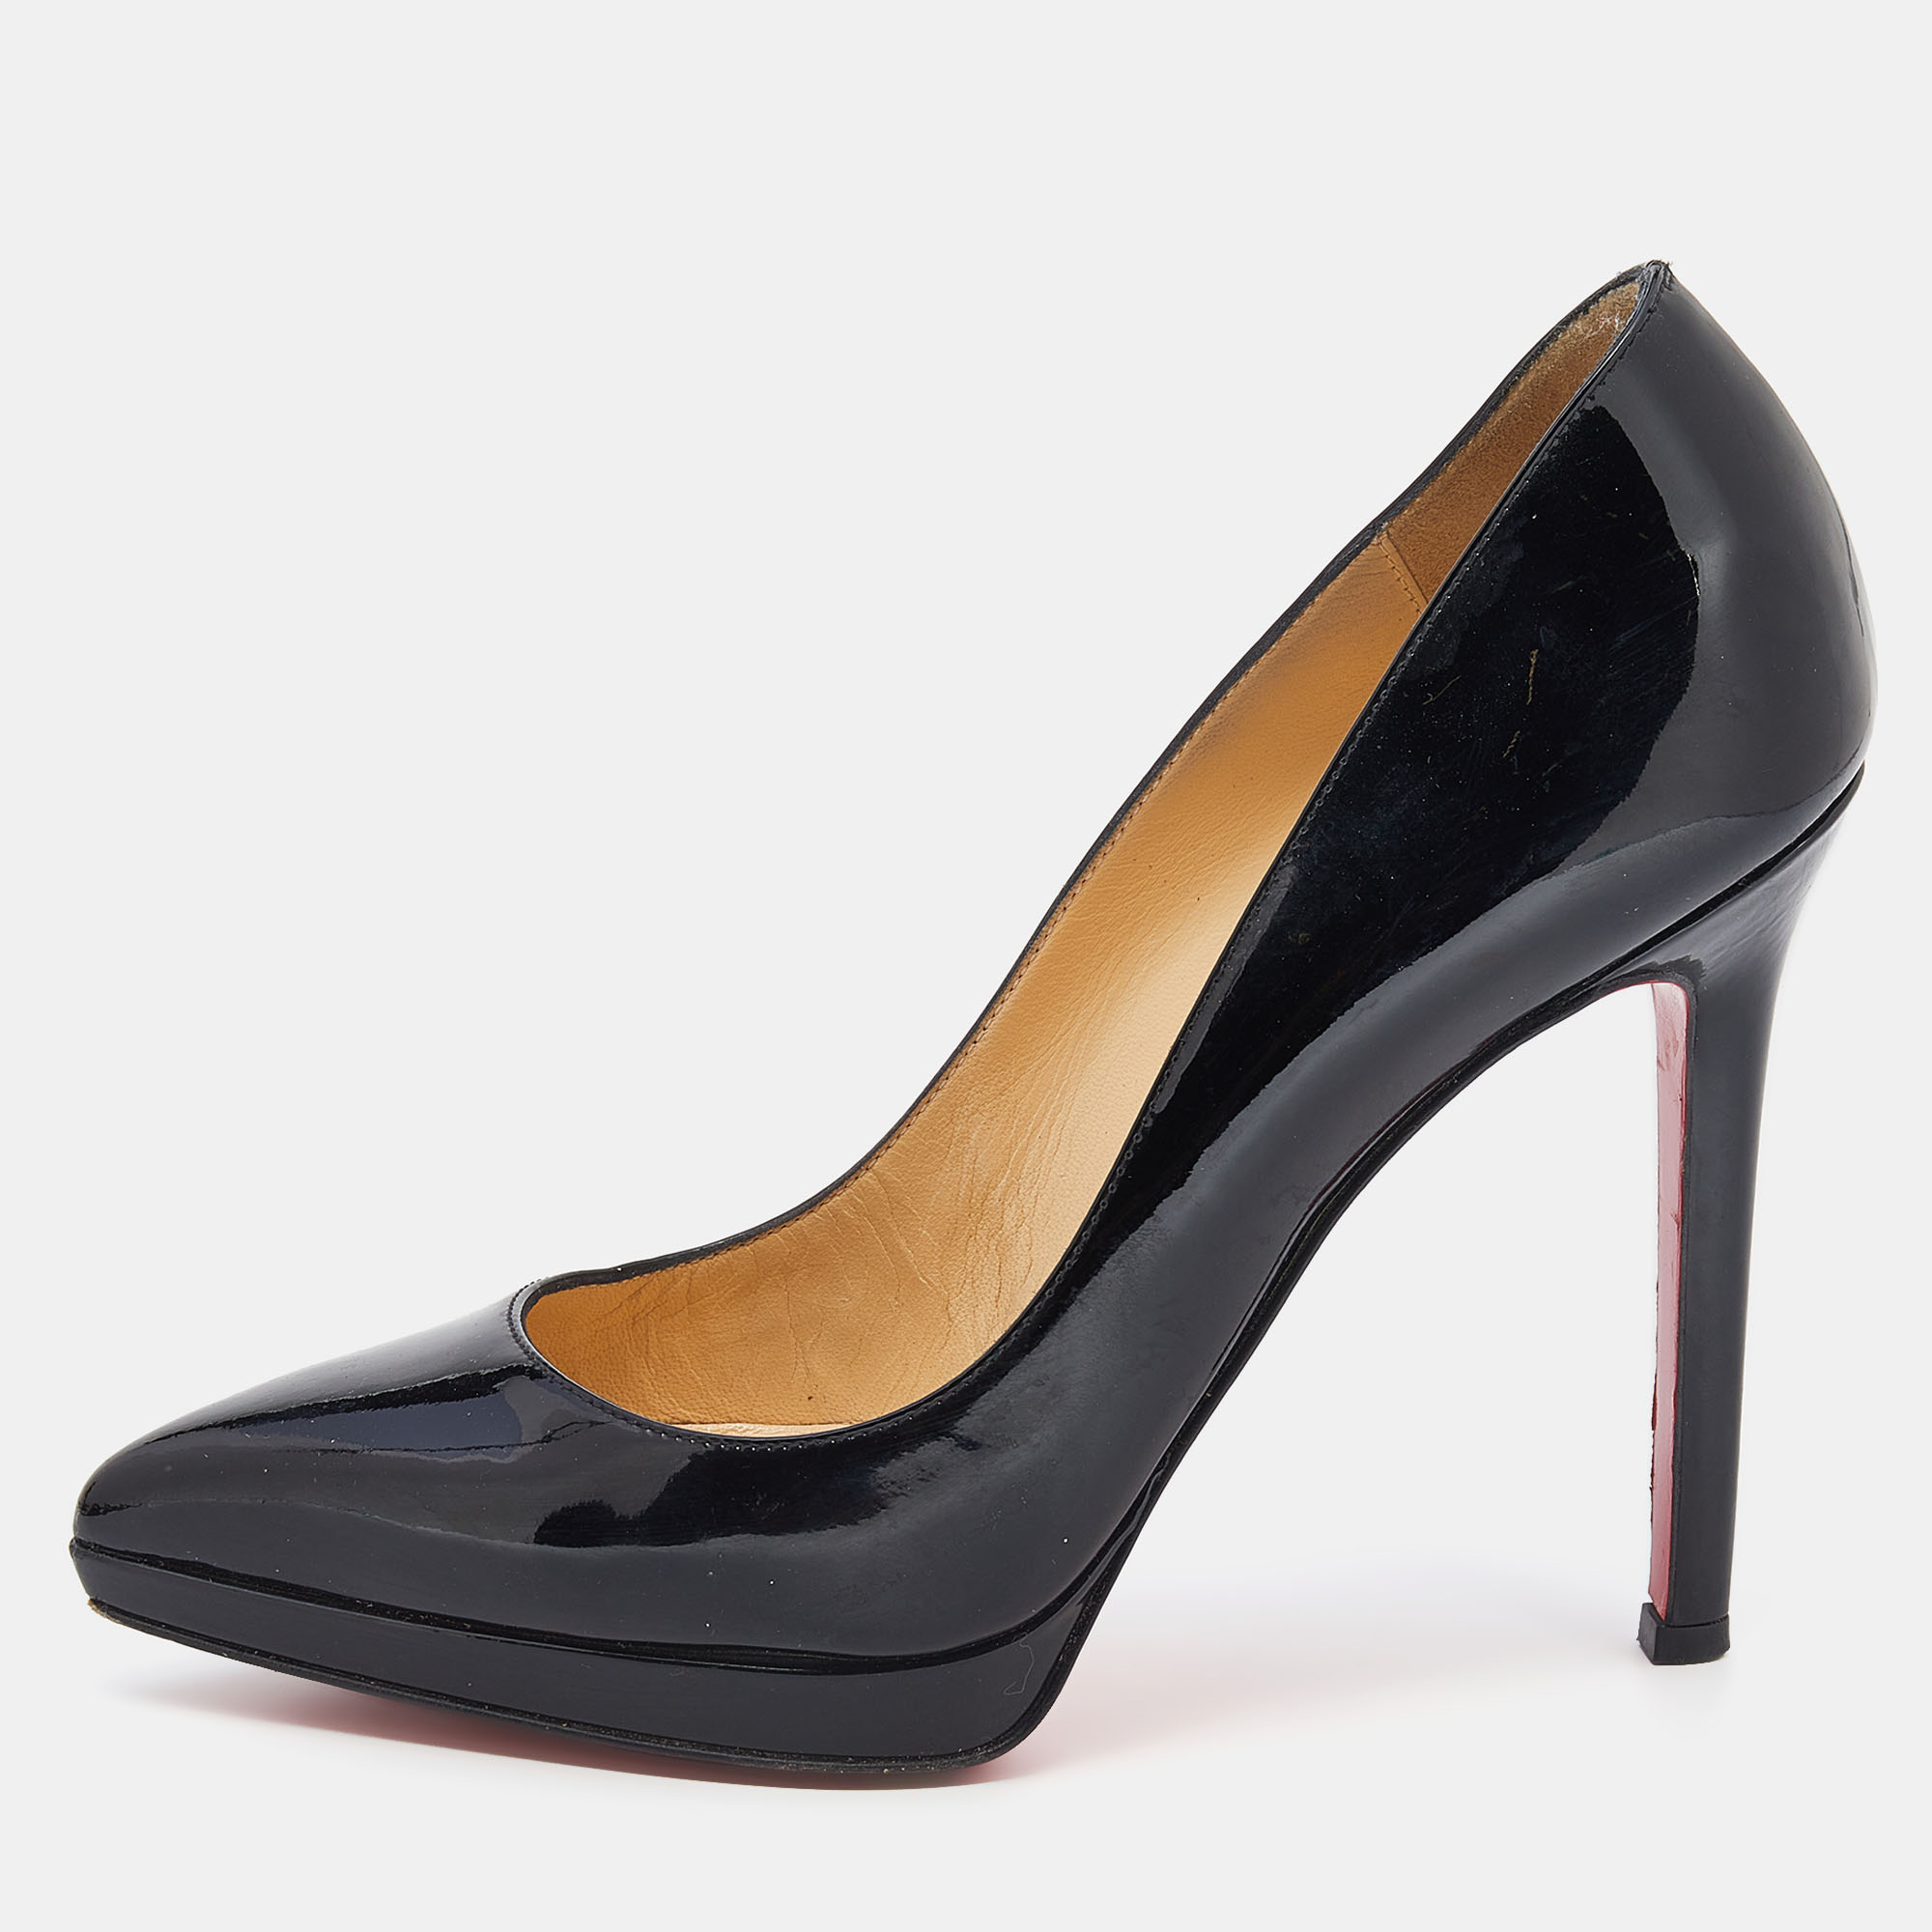 Pre-owned Christian Louboutin Black Patent Leather Decollete Platform Pointed Toe Pumps Size 35